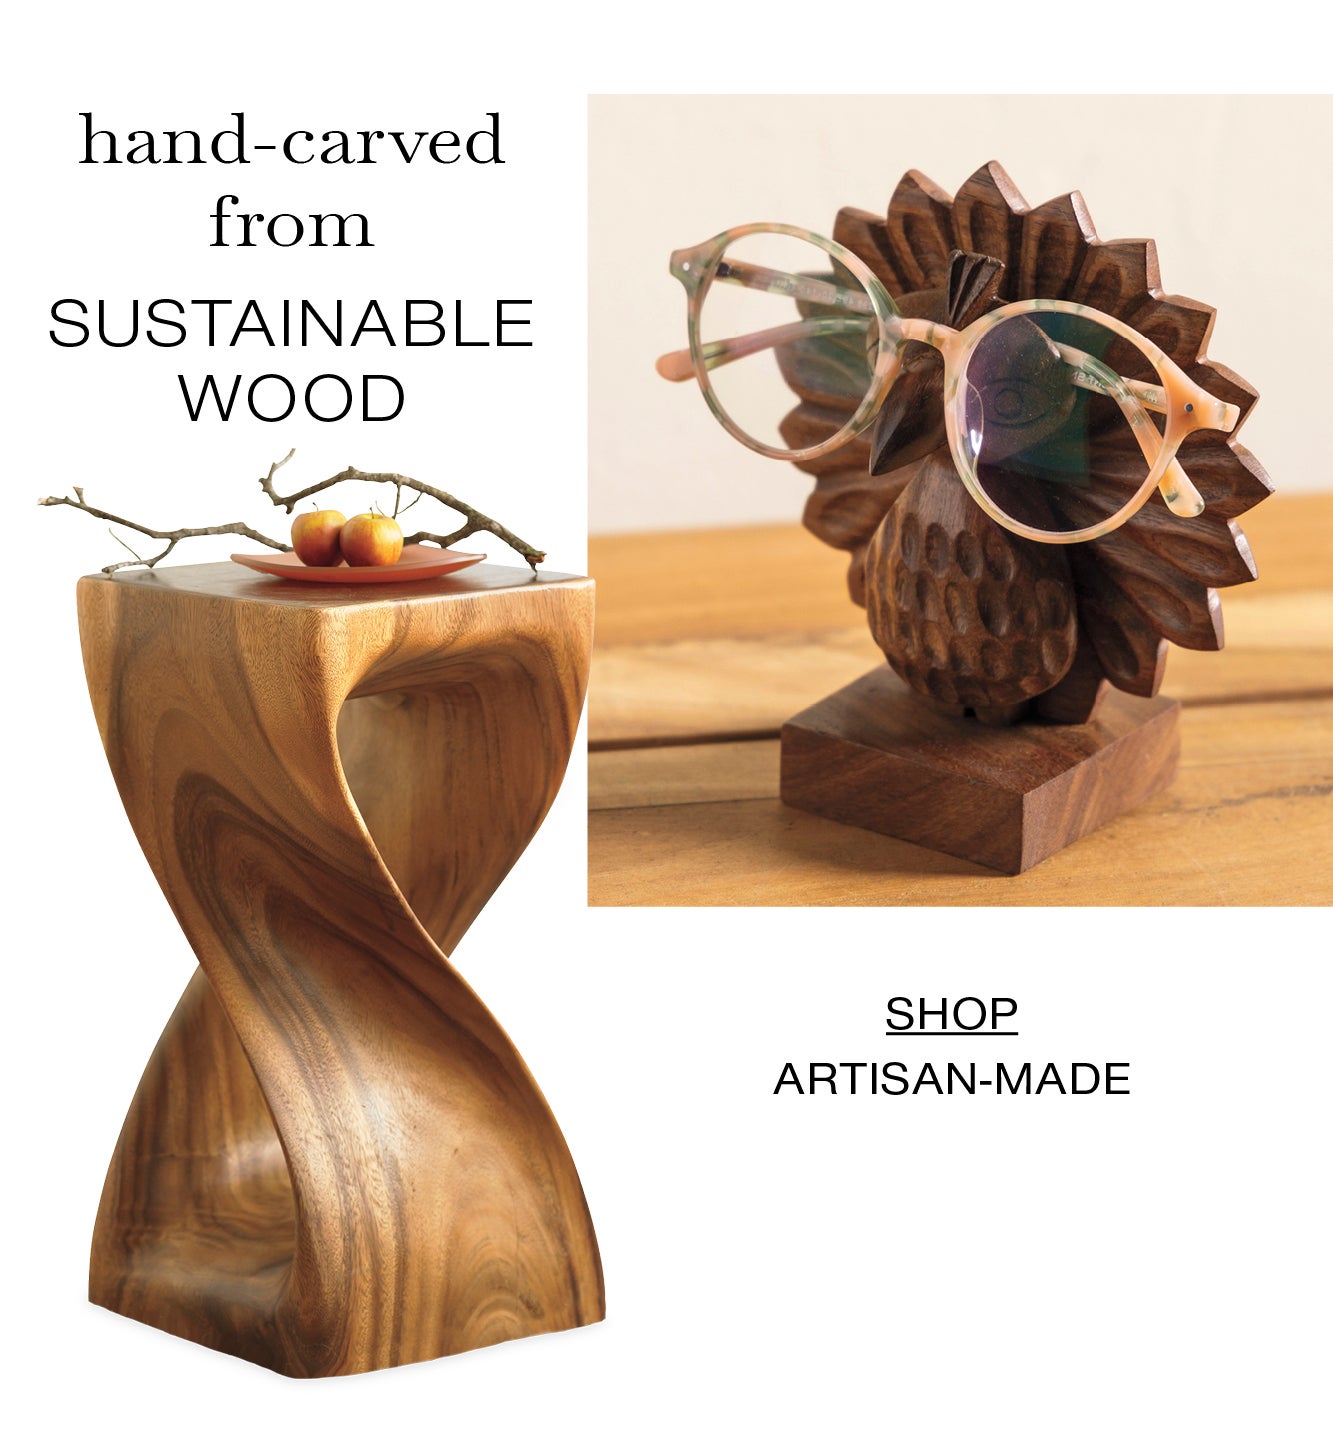 hand-carved from sustainable wood